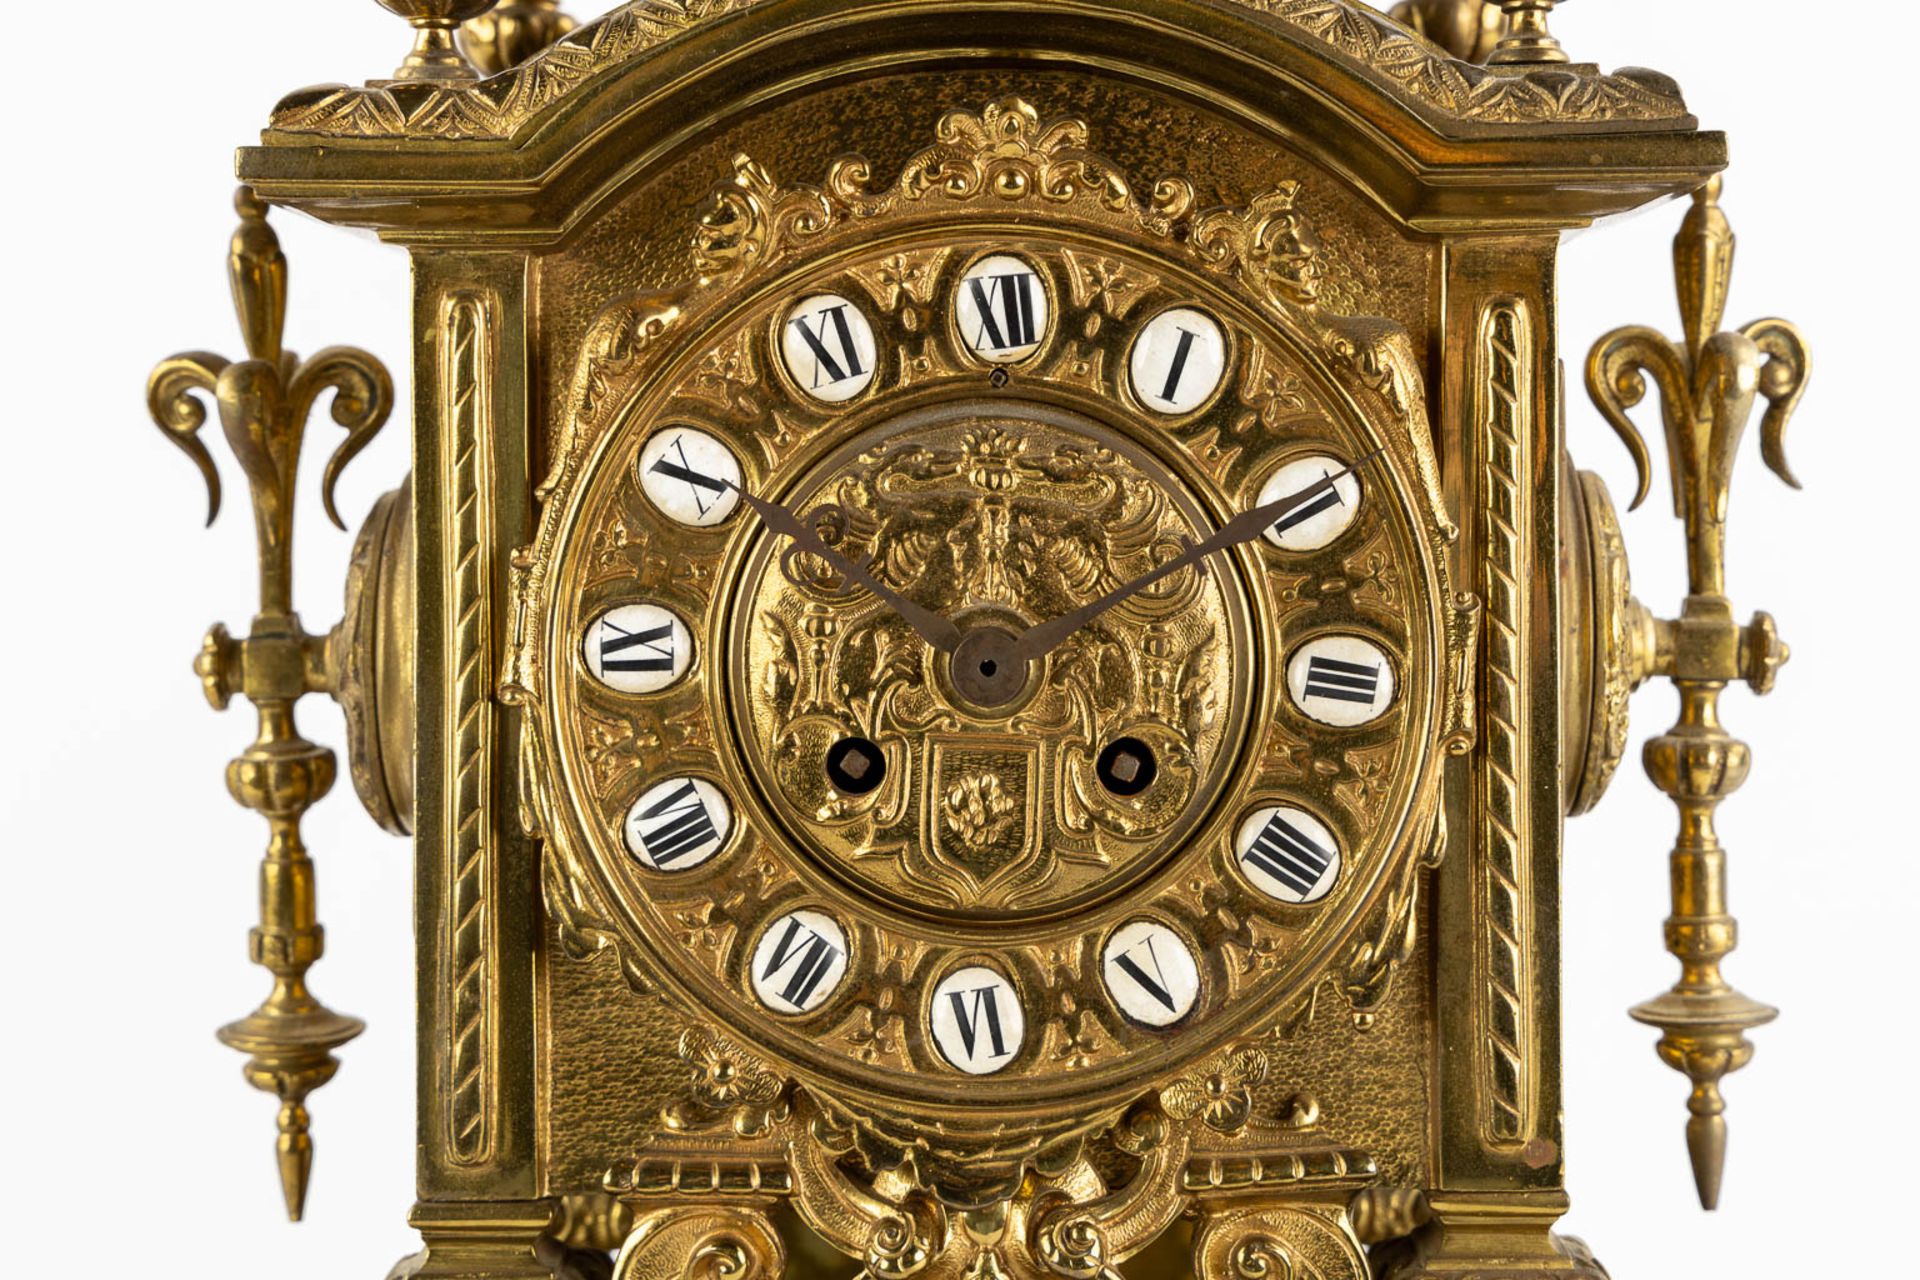 A mantle clock, bronze decorated with angels. Circa 1900. (L:21 x W:27 x H:54 cm) - Image 9 of 13